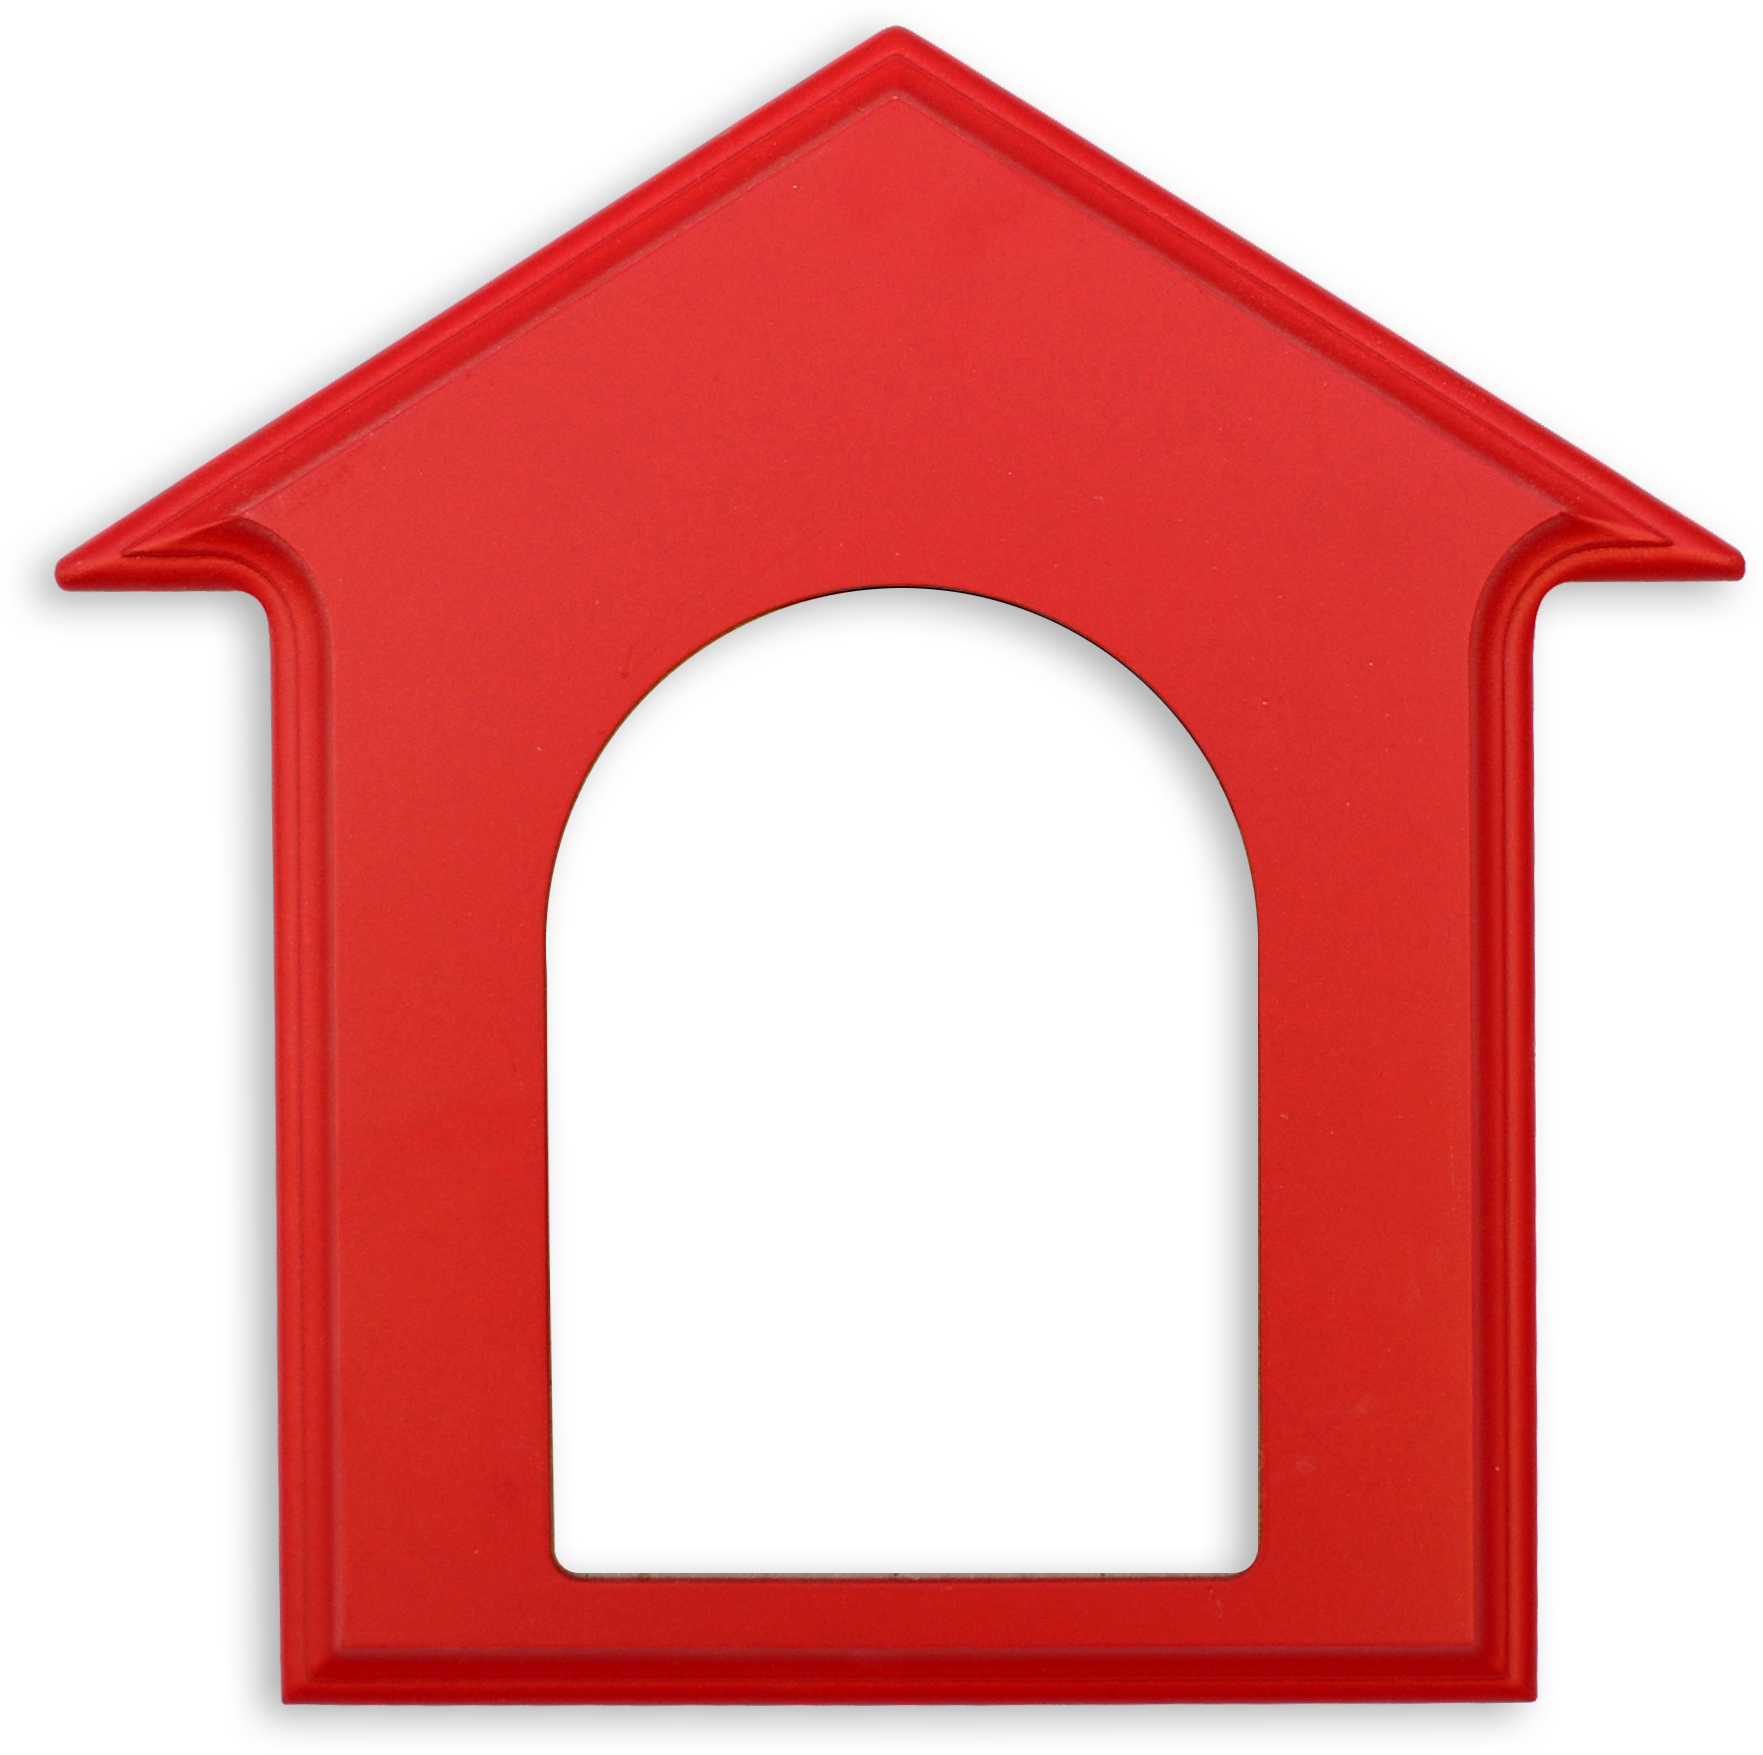 Dog House Image Free Download Clip Art Free Clip Art - Red Dog House Clipart (1950x1950)